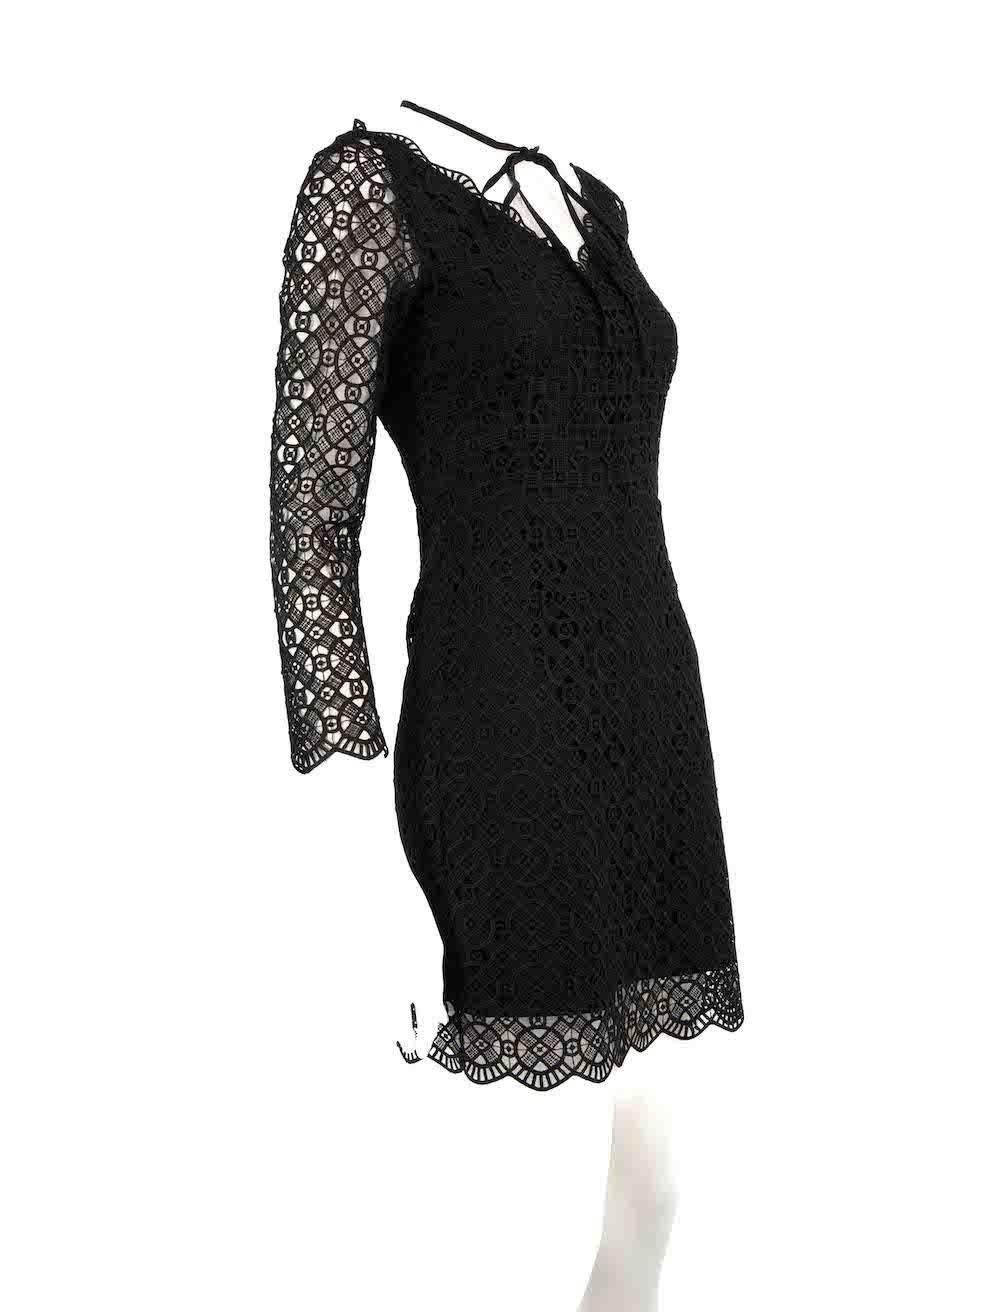 CONDITION is Very good. Minimal wear to dress is evident. Minimal wear to the rear neckline lining with slight discolouration on this used Sandro designer resale item.
 
 
 
 Details
 
 
 Black
 
 Lace
 
 Dress
 
 Mini
 
 Long sheer sleeves
 
 White